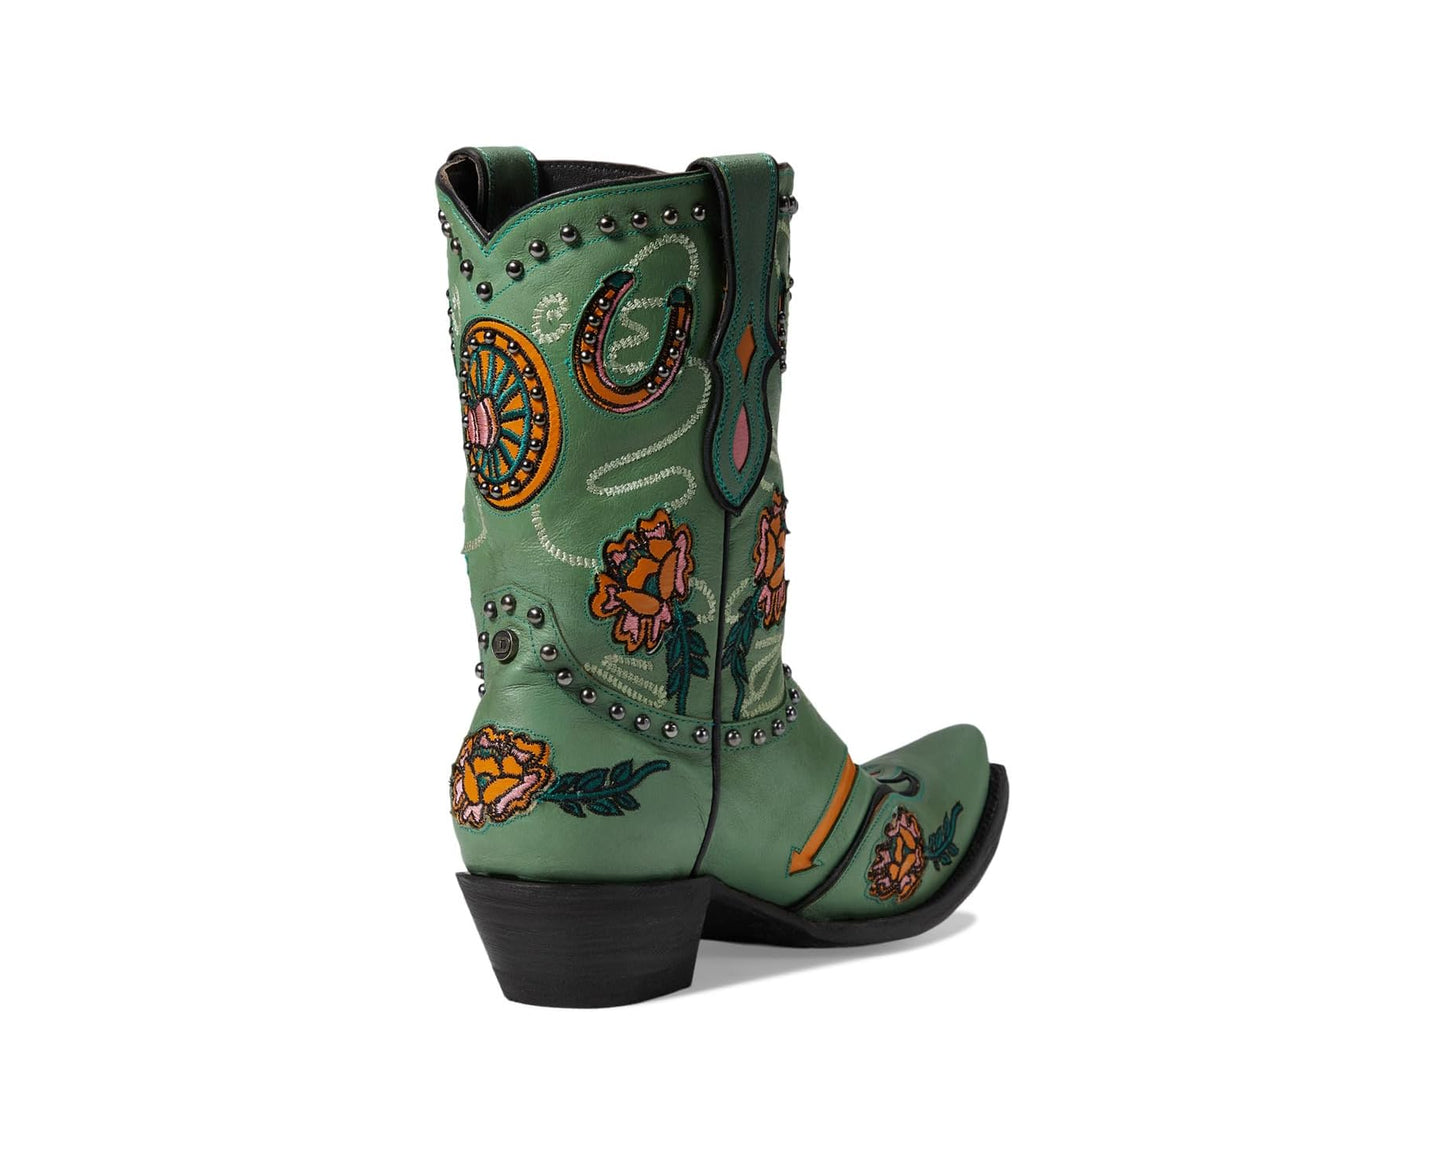 Wagon Wheels Turquoise- Old Gringo Cowboy Boots at Bourbon Cowgirl